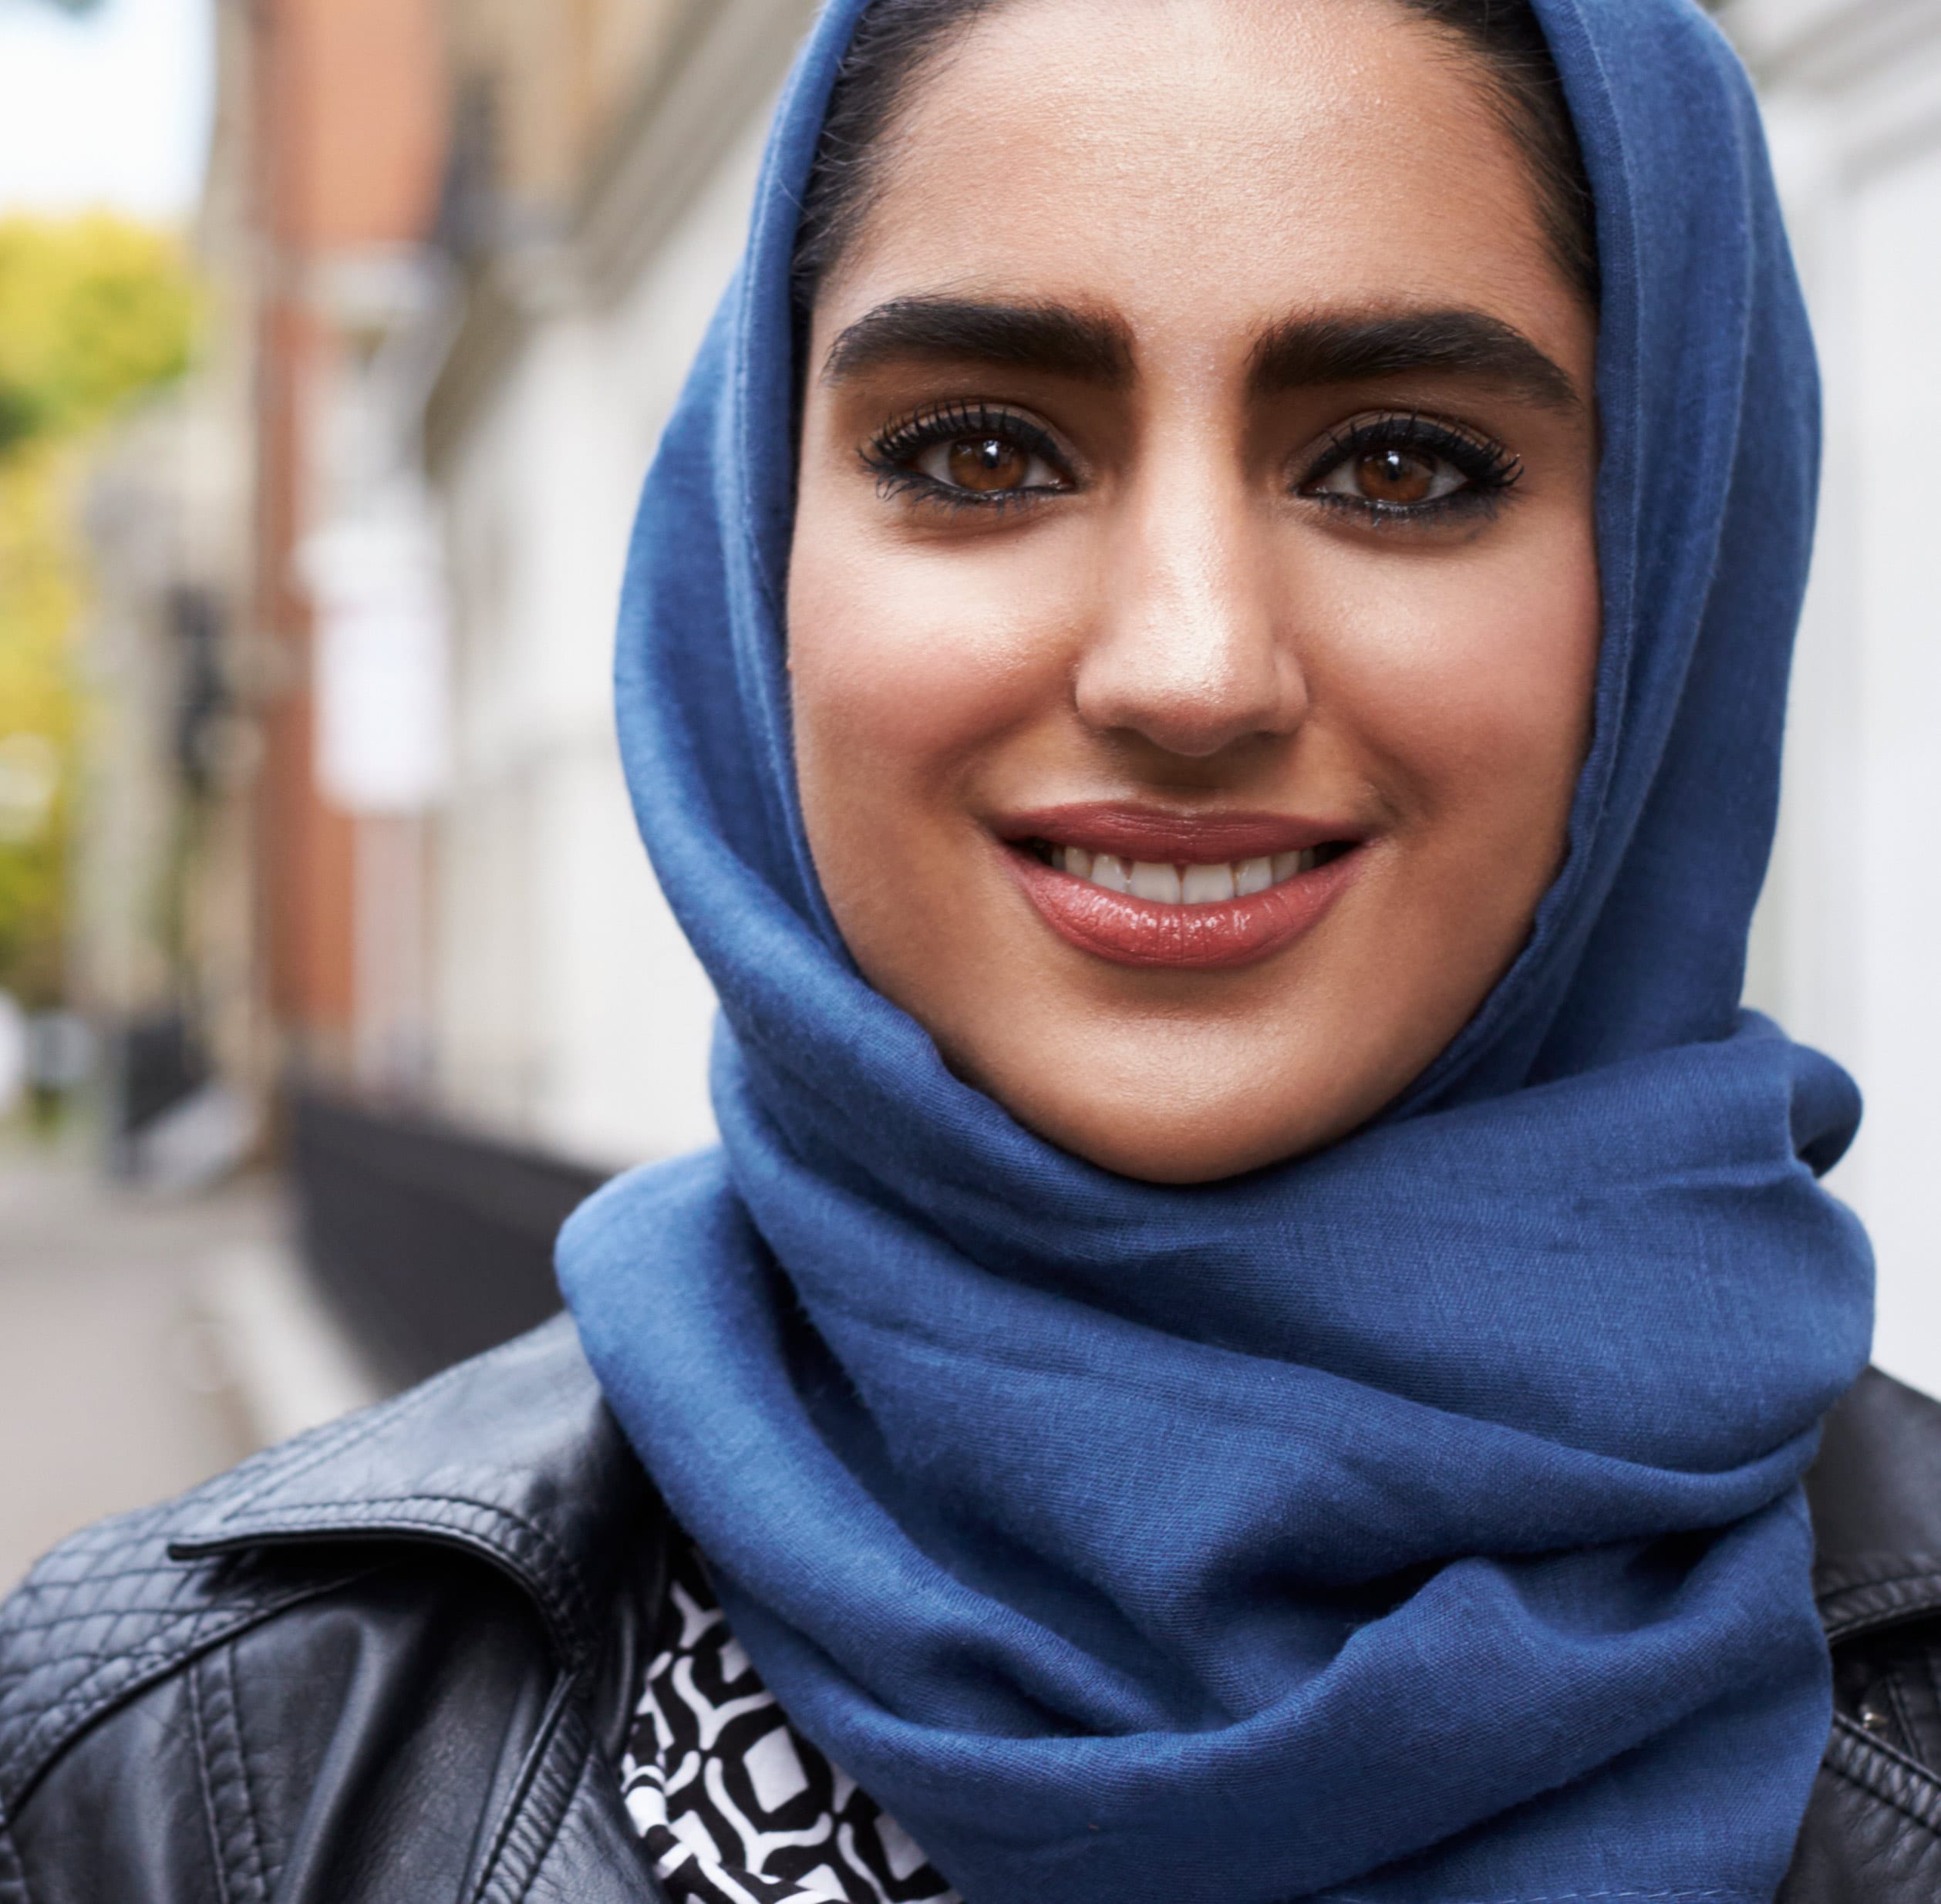 Portrait of a smiling woman with a hijab standing on a city street.